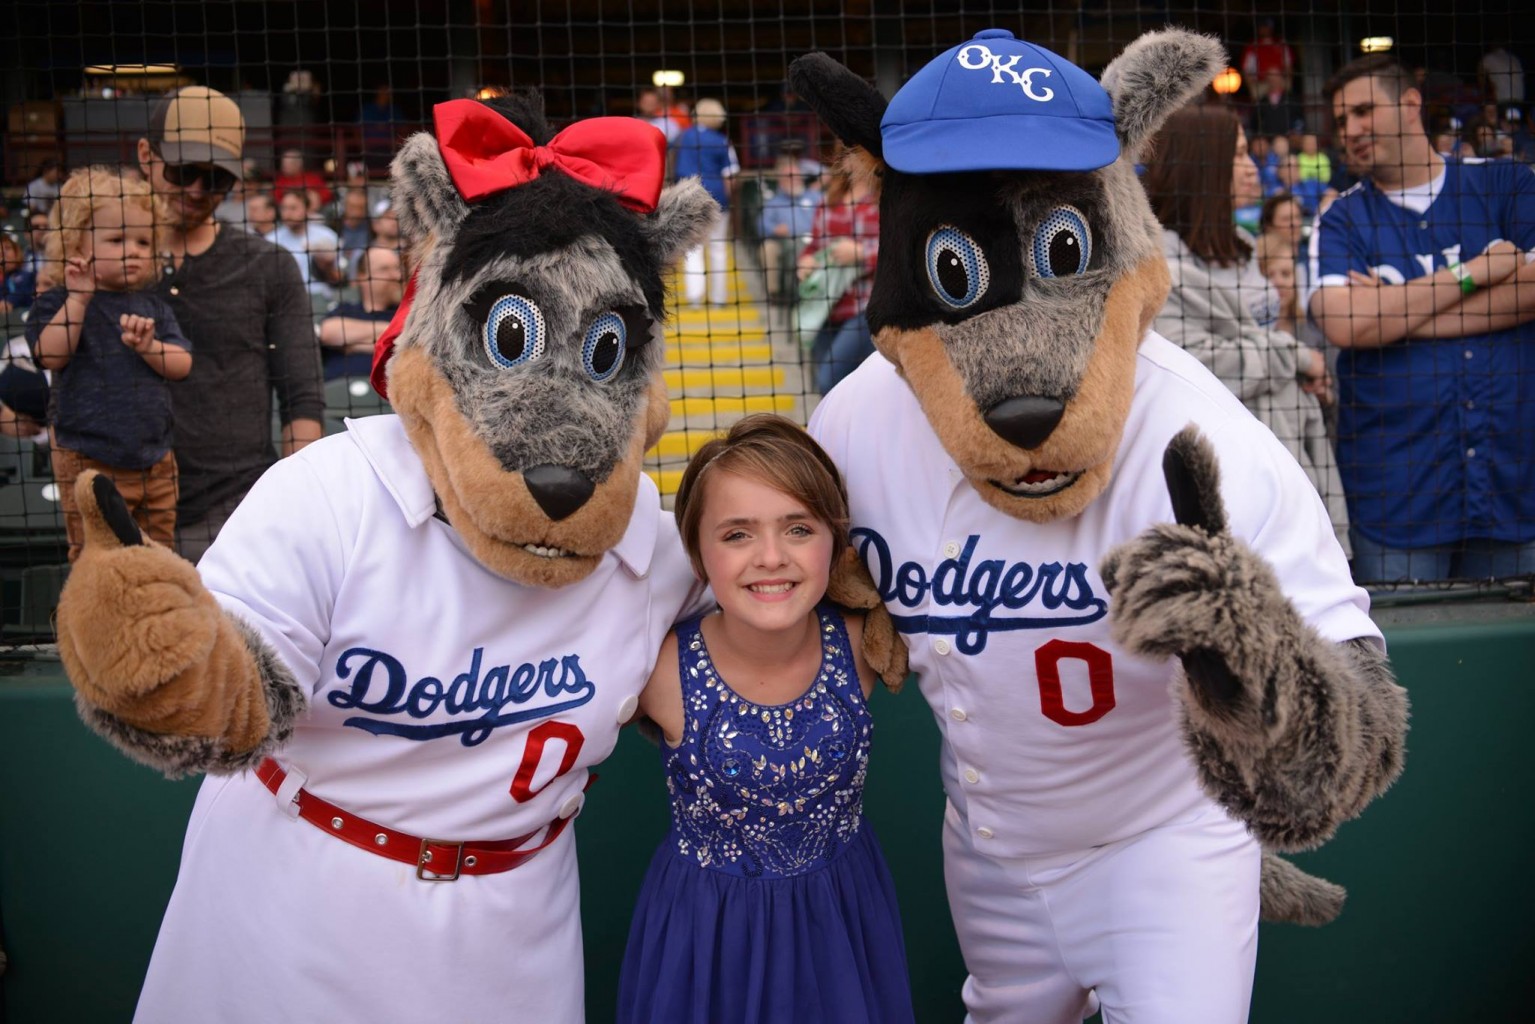 VARIETY OF FAMILY FUN FILL OKLAHOMA CITY DODGERS’ 2019 BASEBALL SCHEDULE